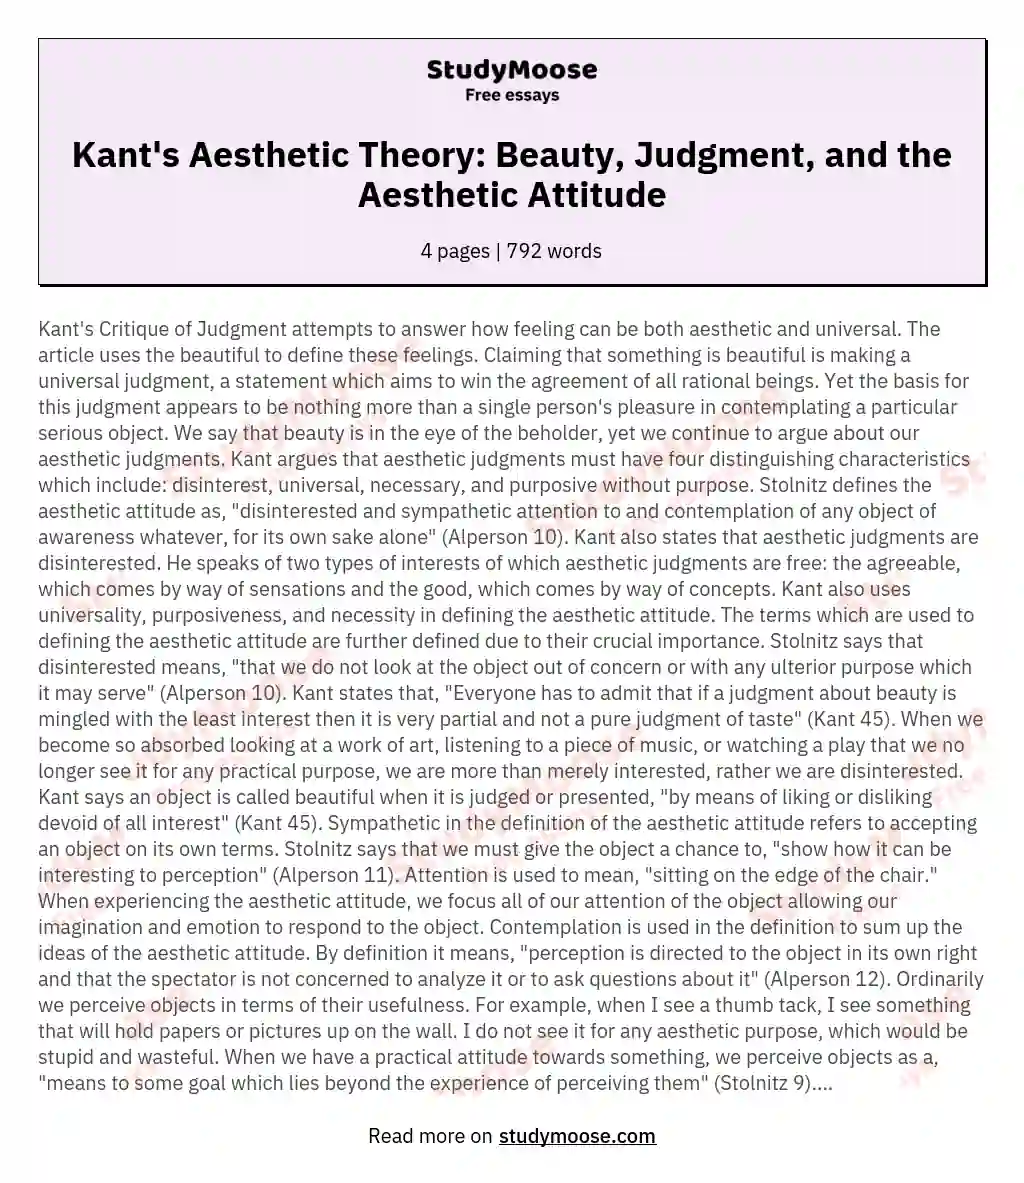 Kant's Aesthetic Theory: Beauty, Judgment, and the Aesthetic Attitude essay